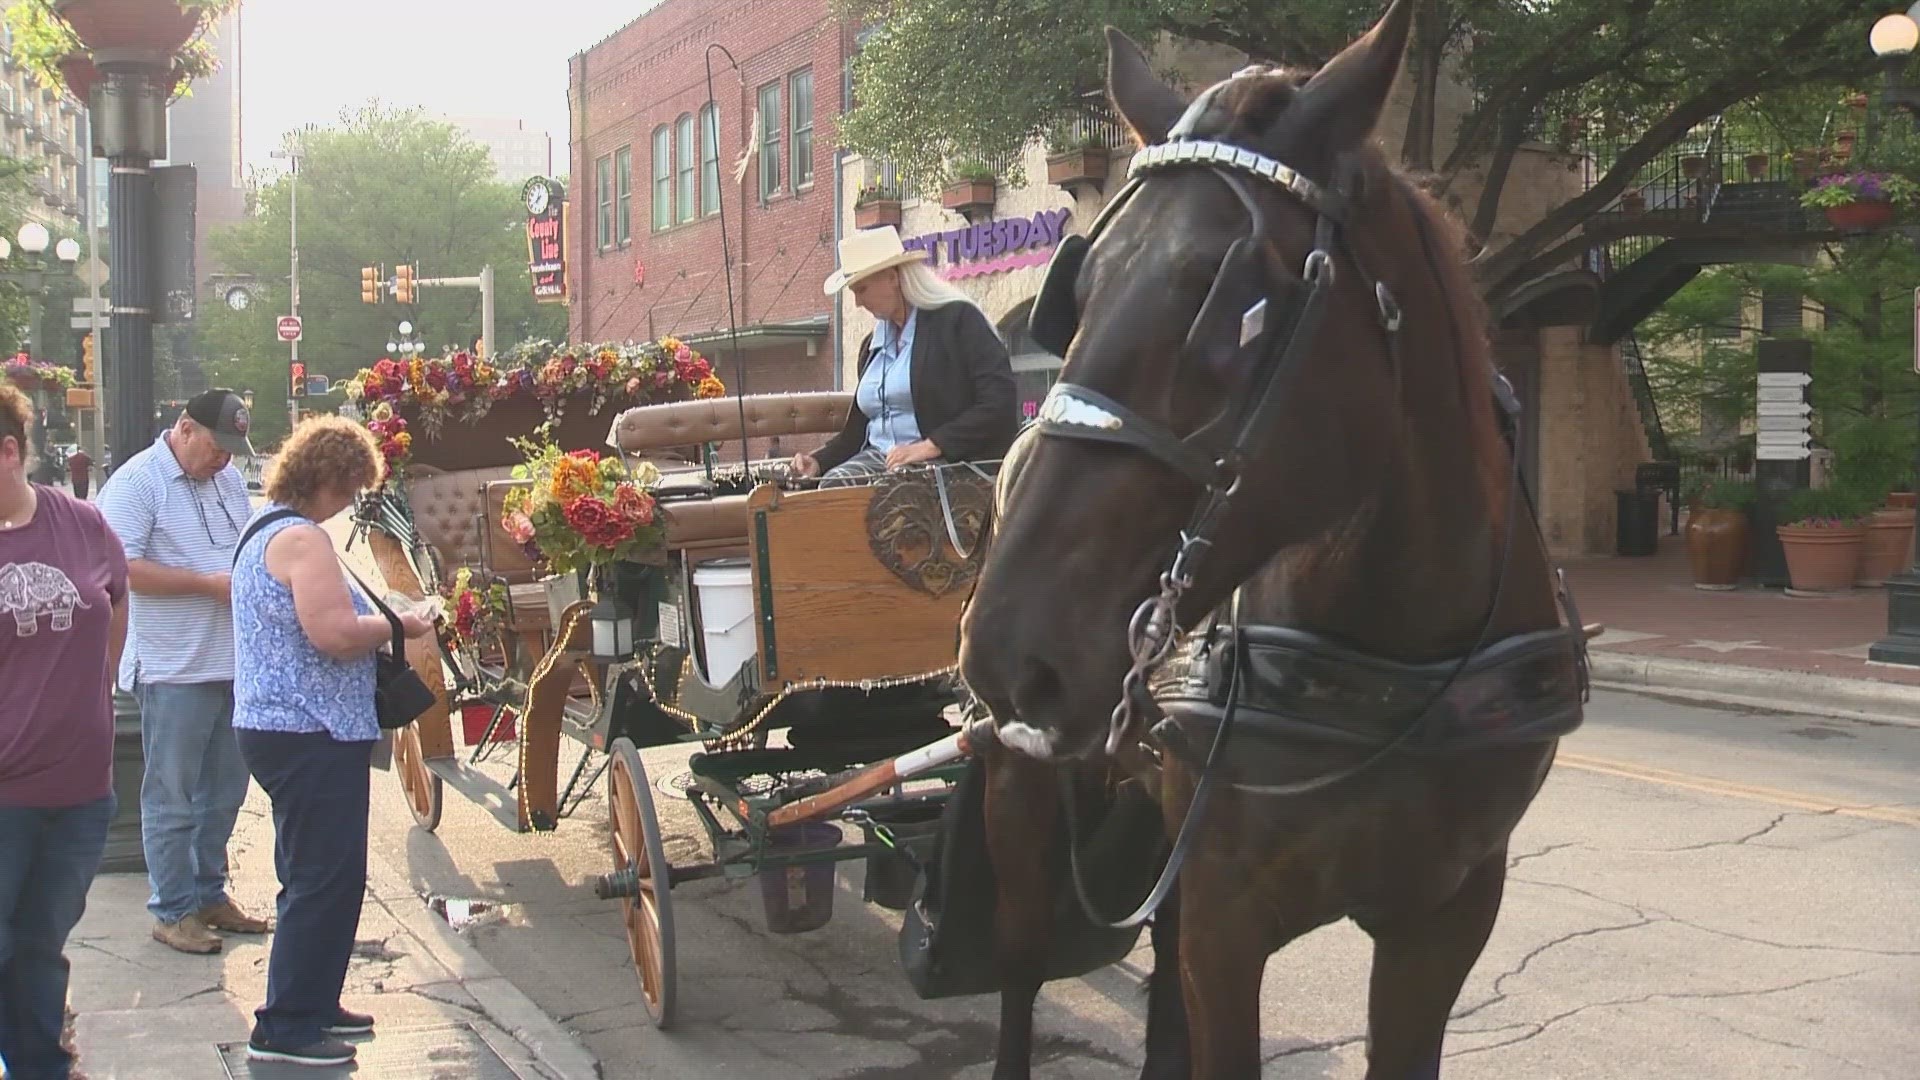 City council committee evaluating future of horse-drawn carriages in downtown San Antonio